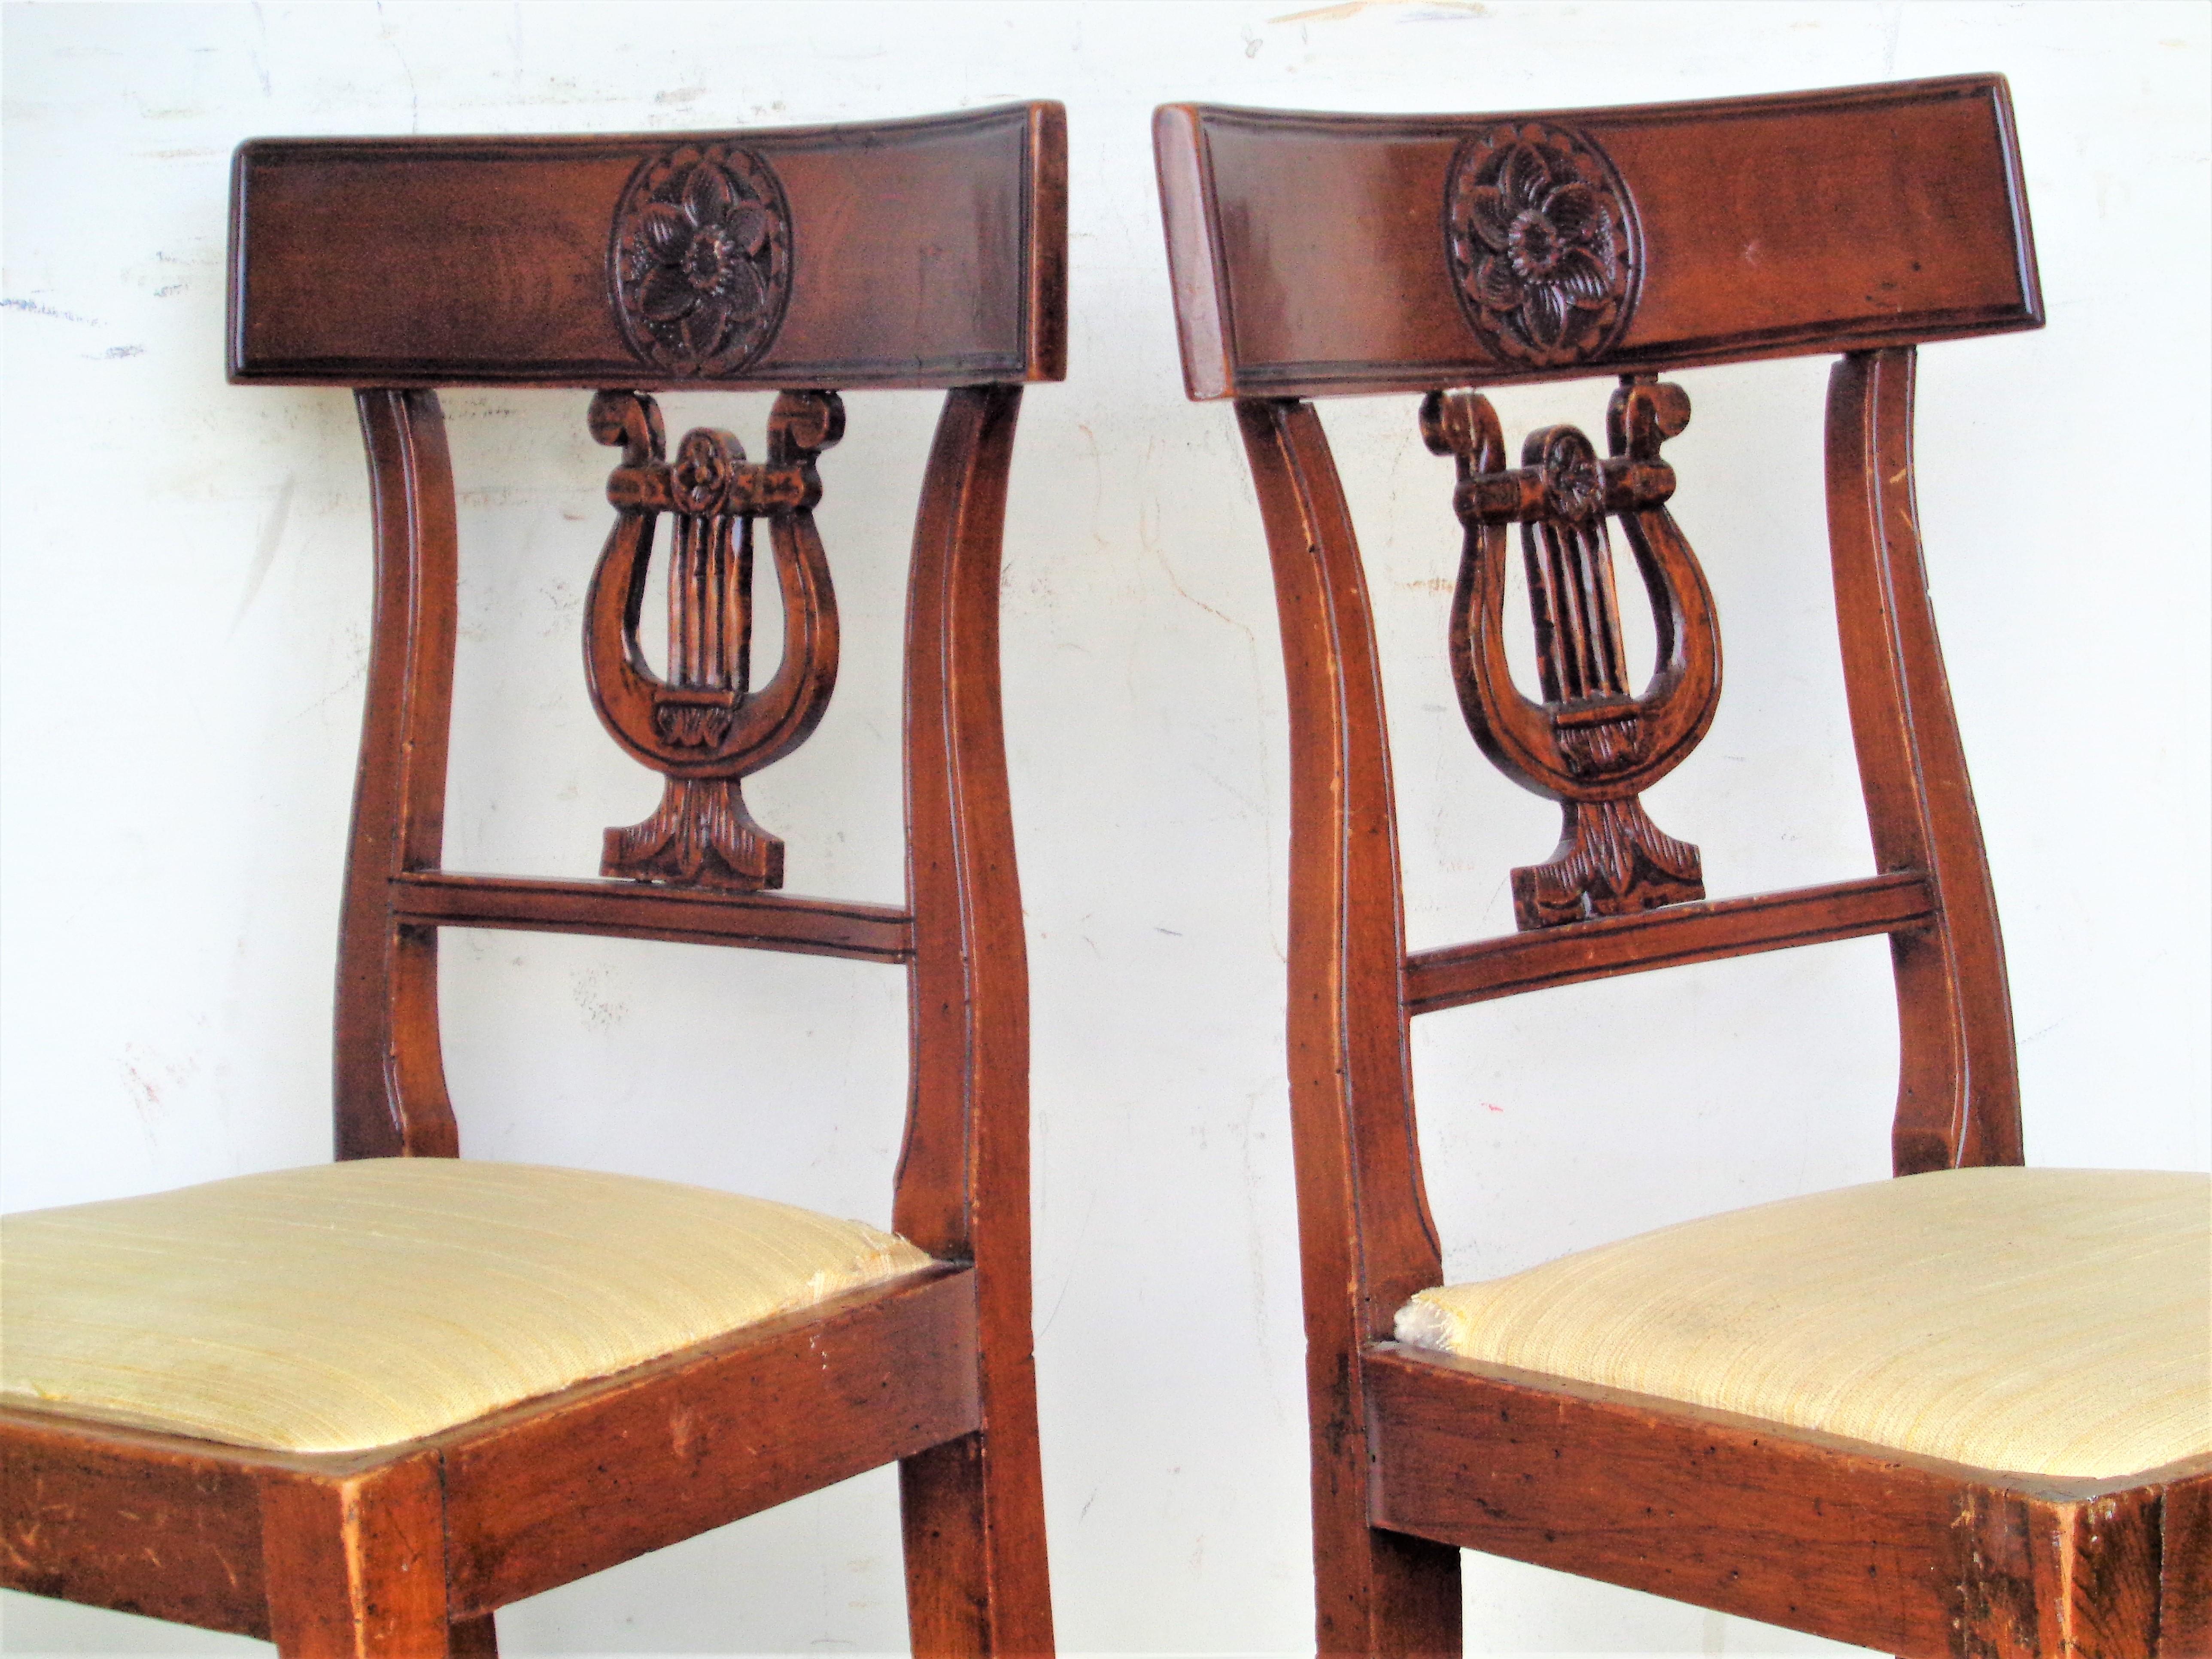  Italian Neoclassical Lyre Back Chairs, Circa 1800 For Sale 5